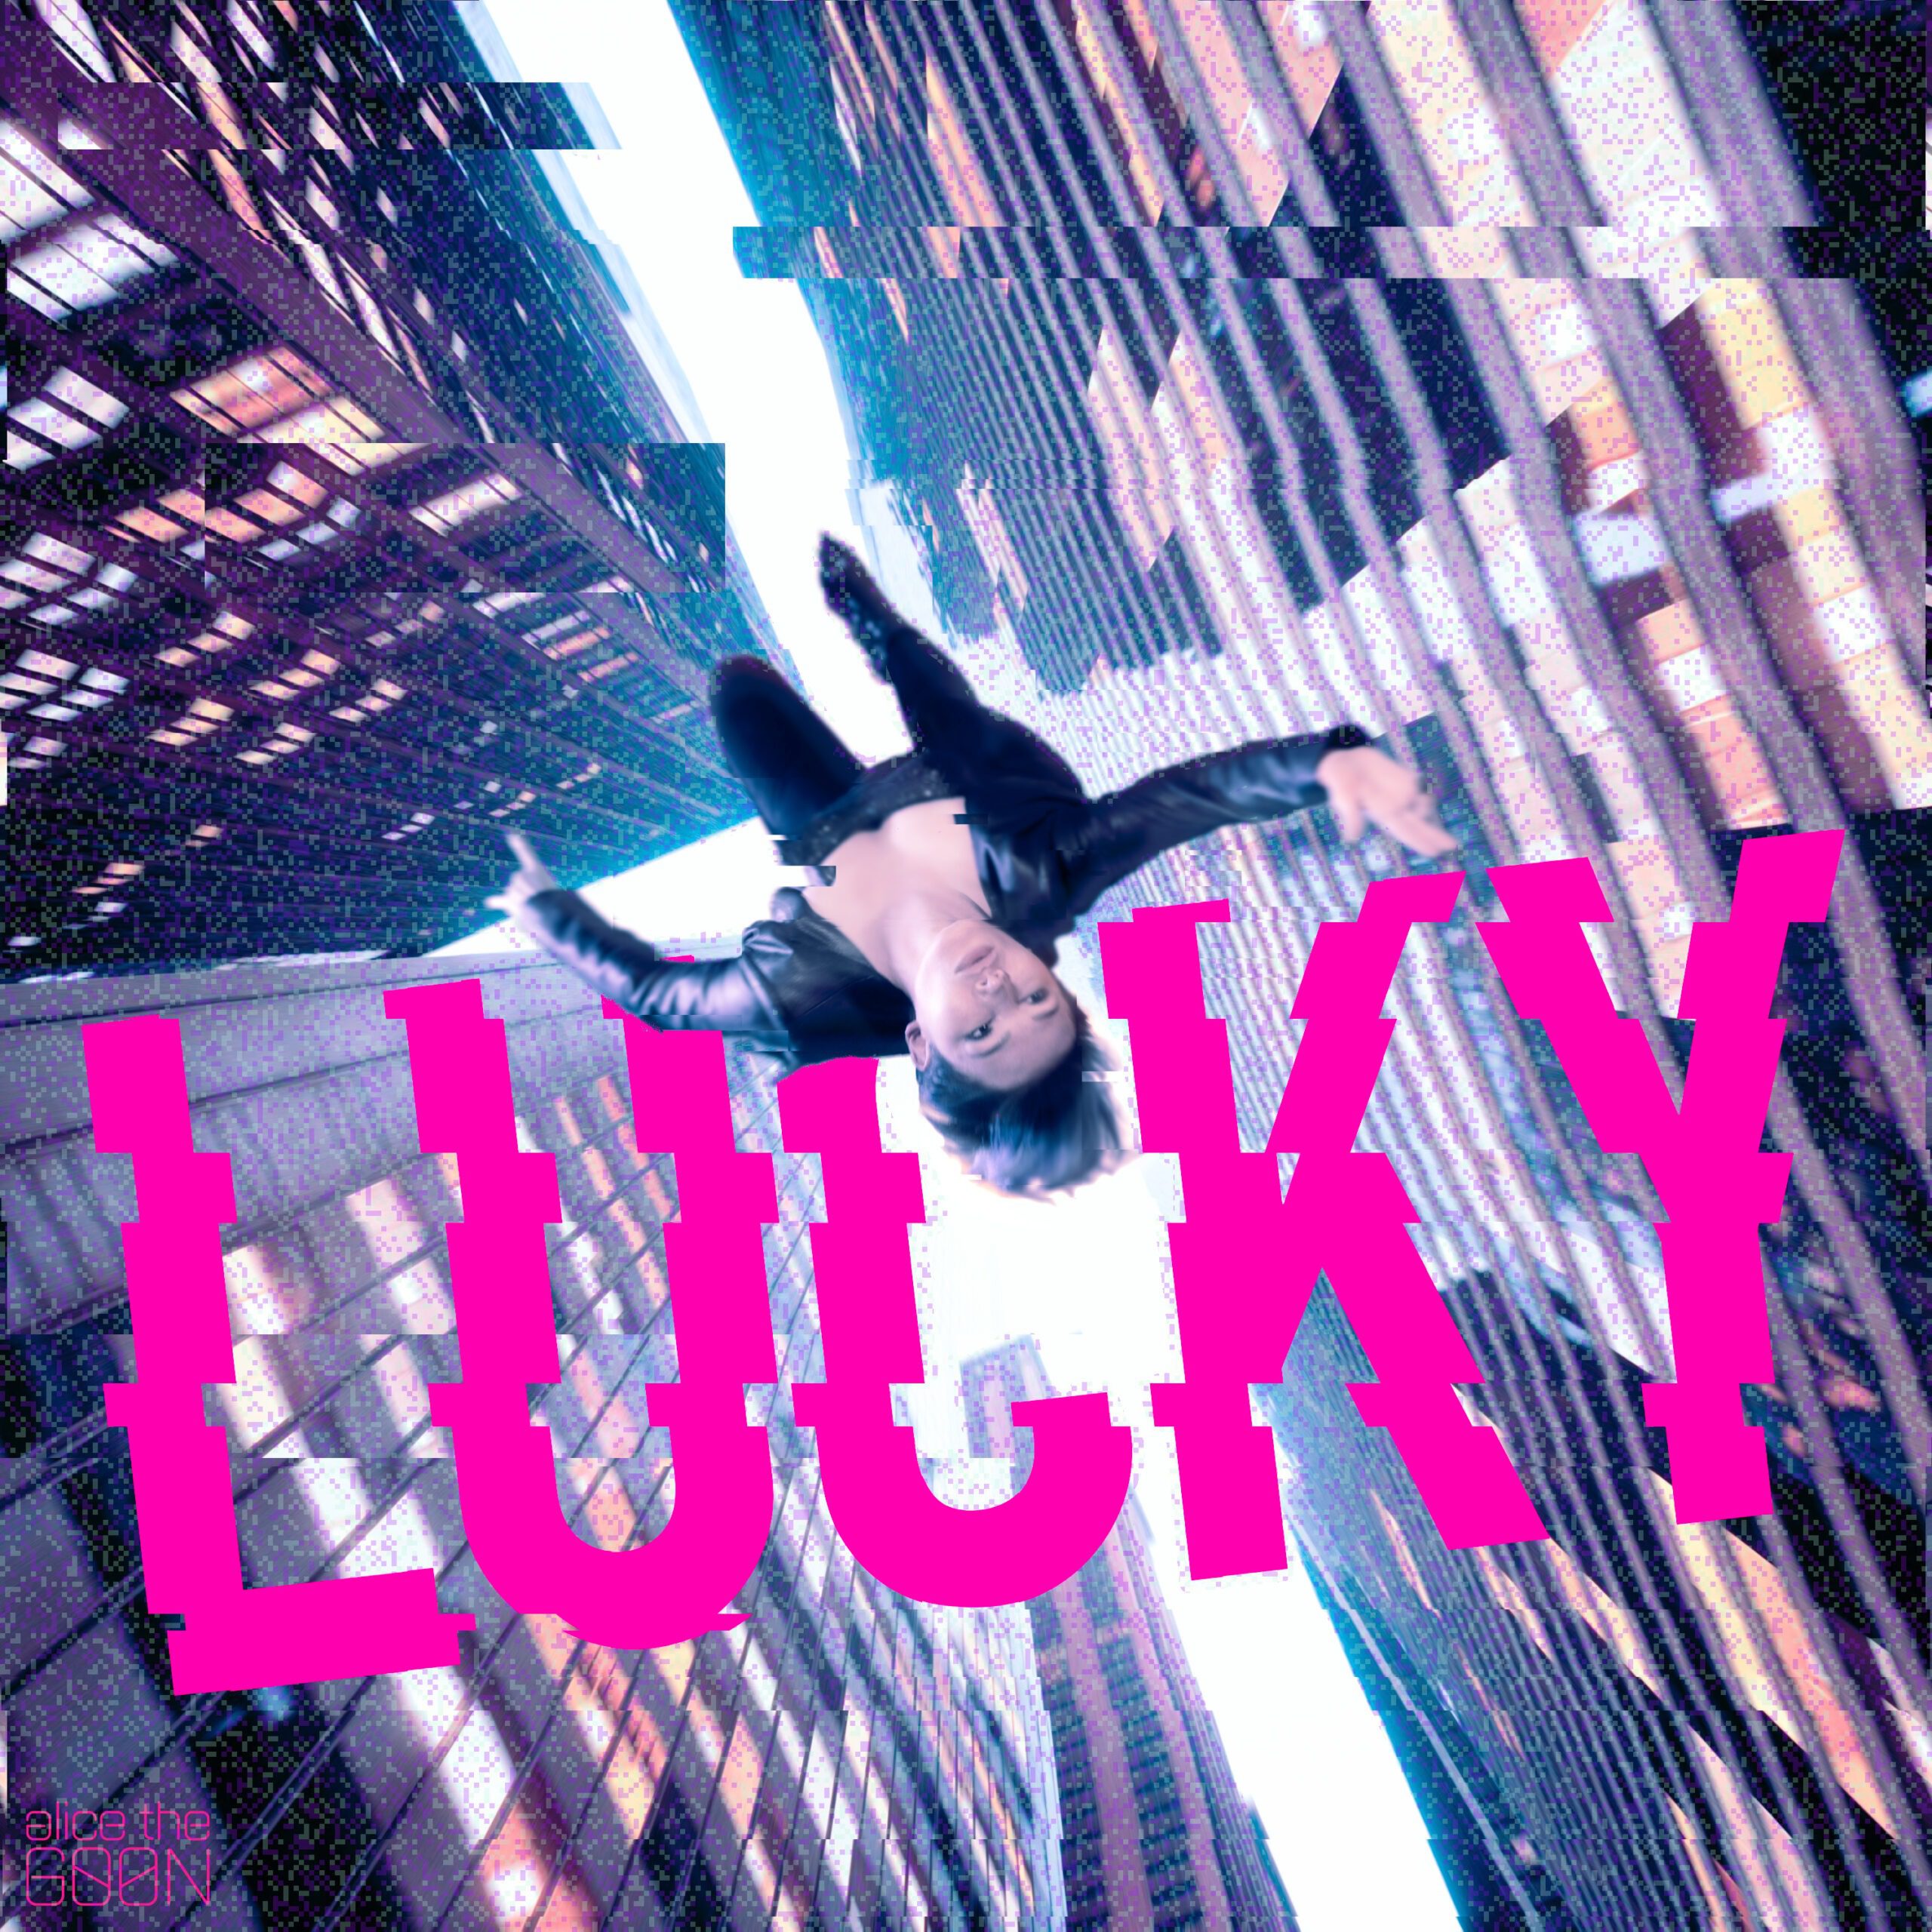 Unconventional Solo Artist Alice The G00N Excels In New Futuristic Single Called “Lucky”